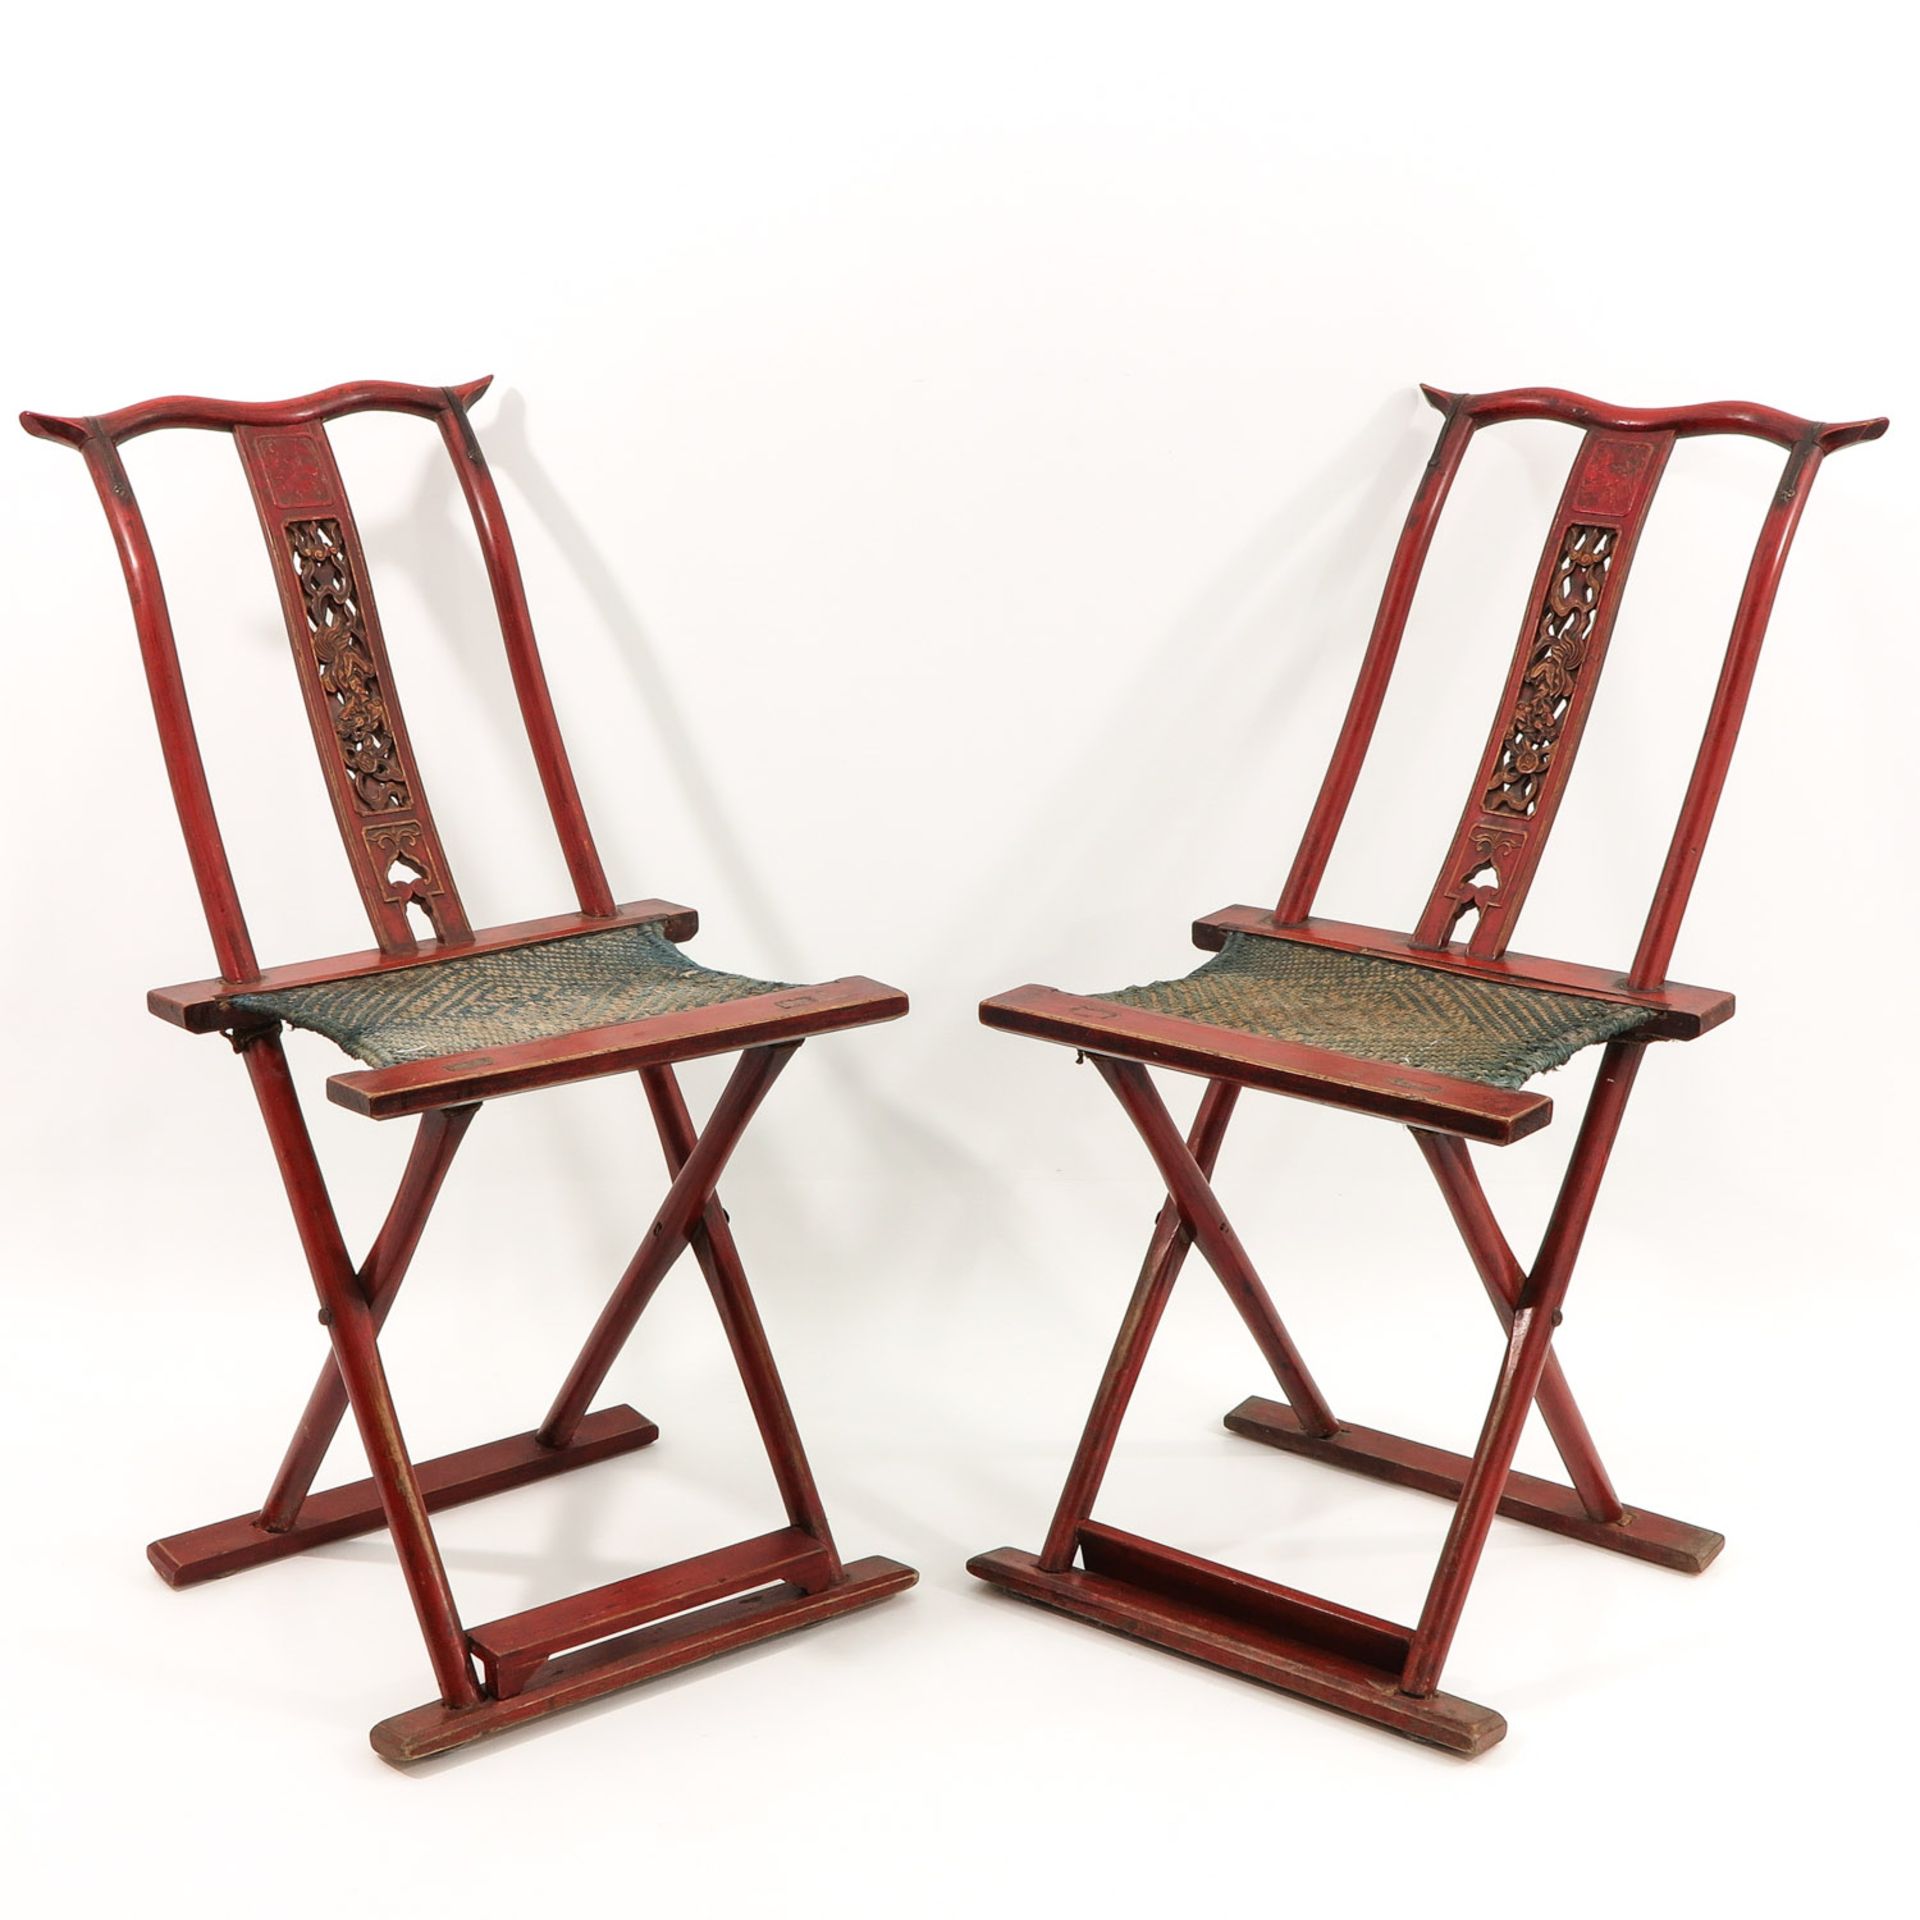 A Pair of Chinese Folding Chairs